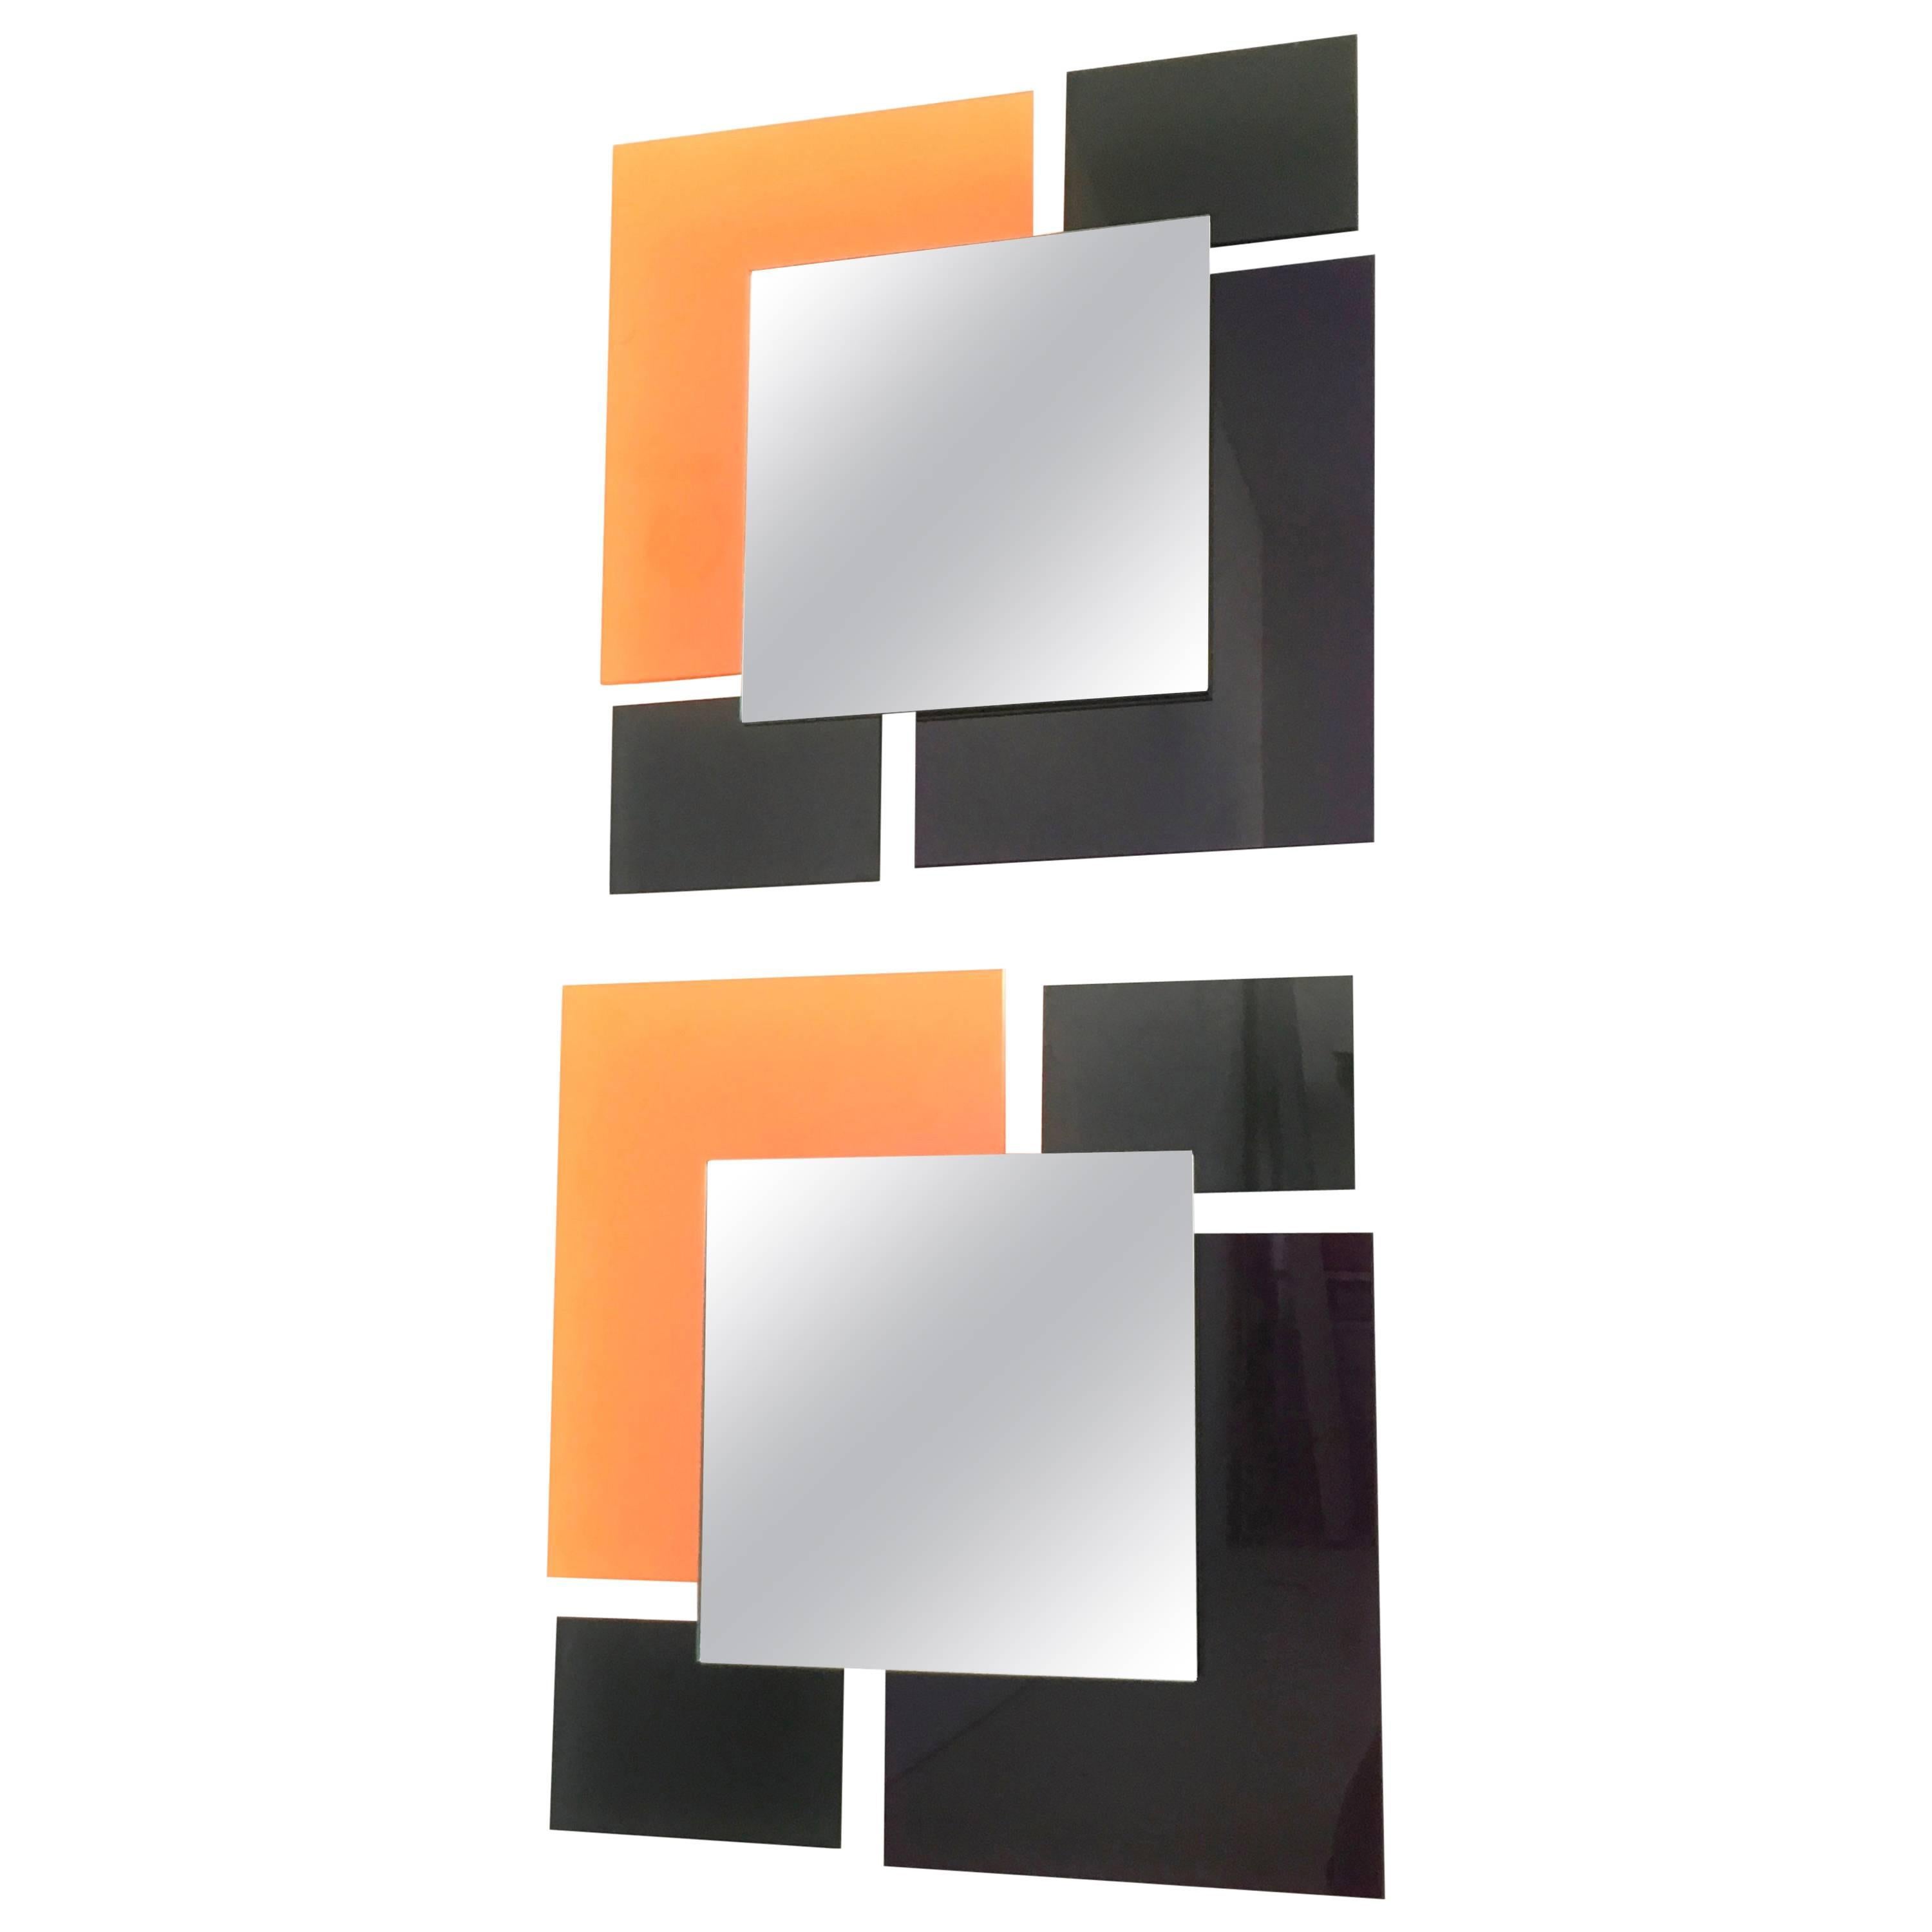 Pair of Postmodern Black and Orange Wall Mirrors in the Style of Sottsass, 1980s